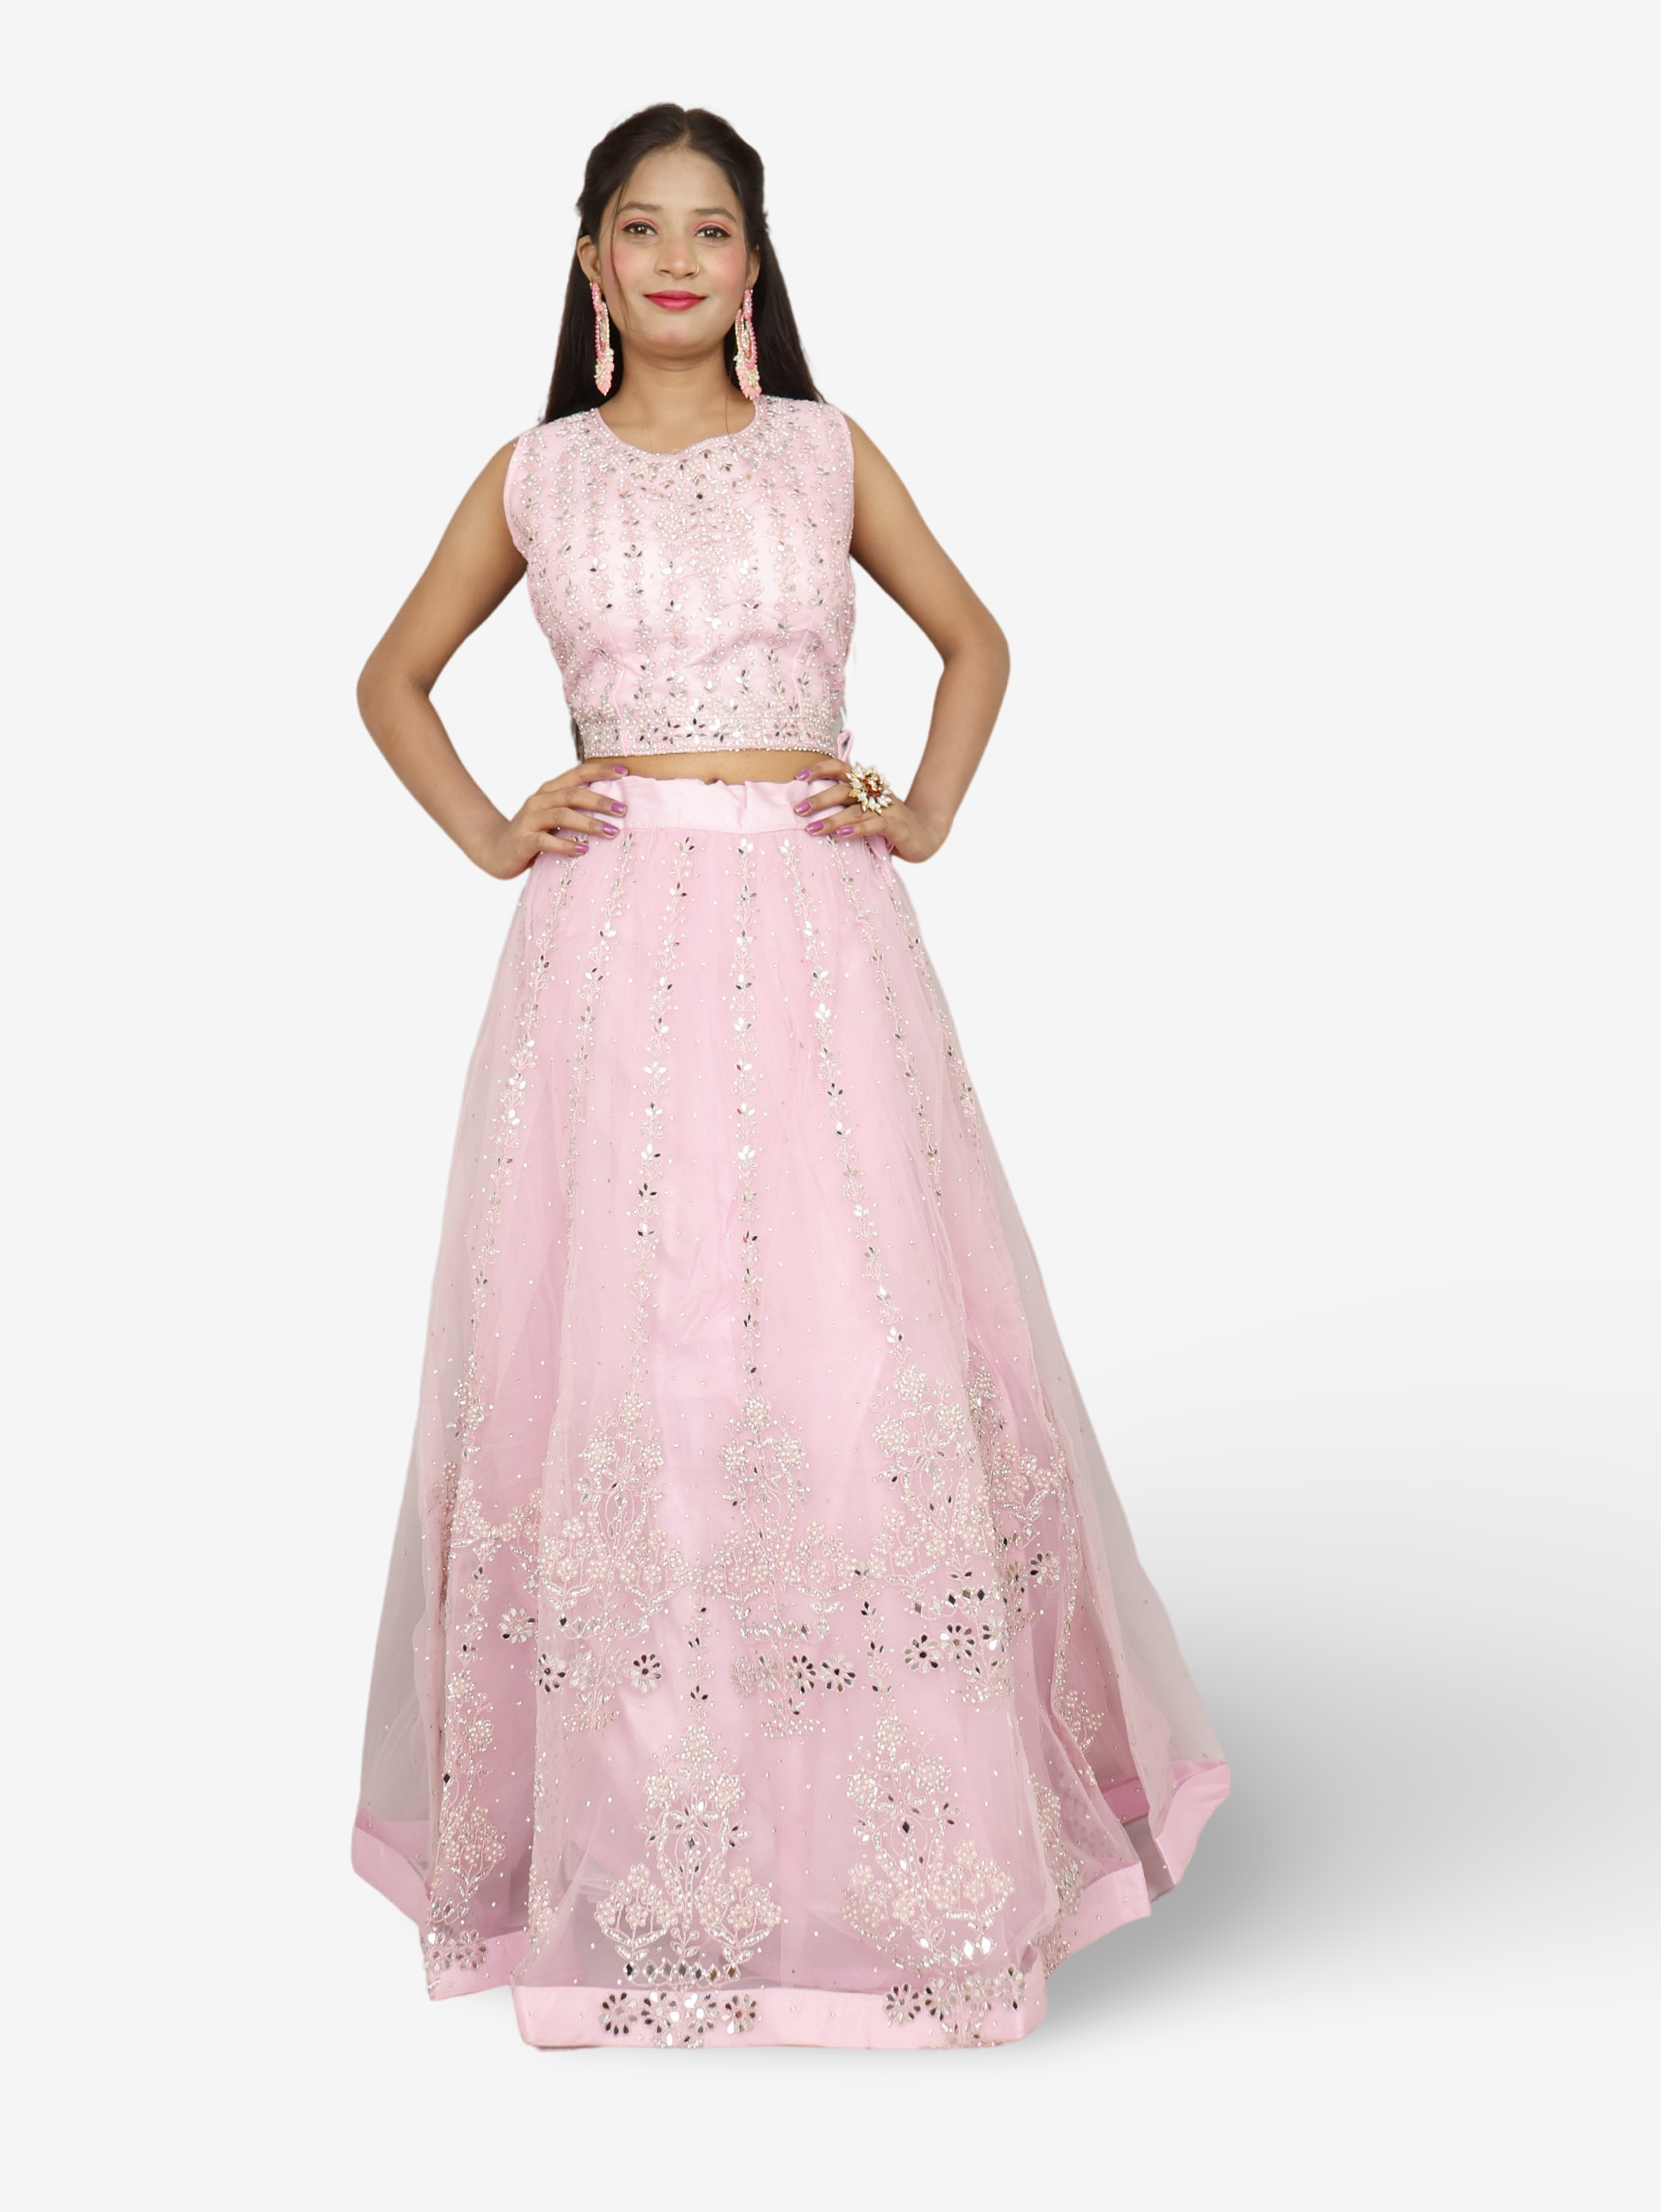 Beautiful mirror and stone work on this pink lehenga set for women by Shreekama Pink Designer Lehenga for Party Festival Wedding Occasion in Noida